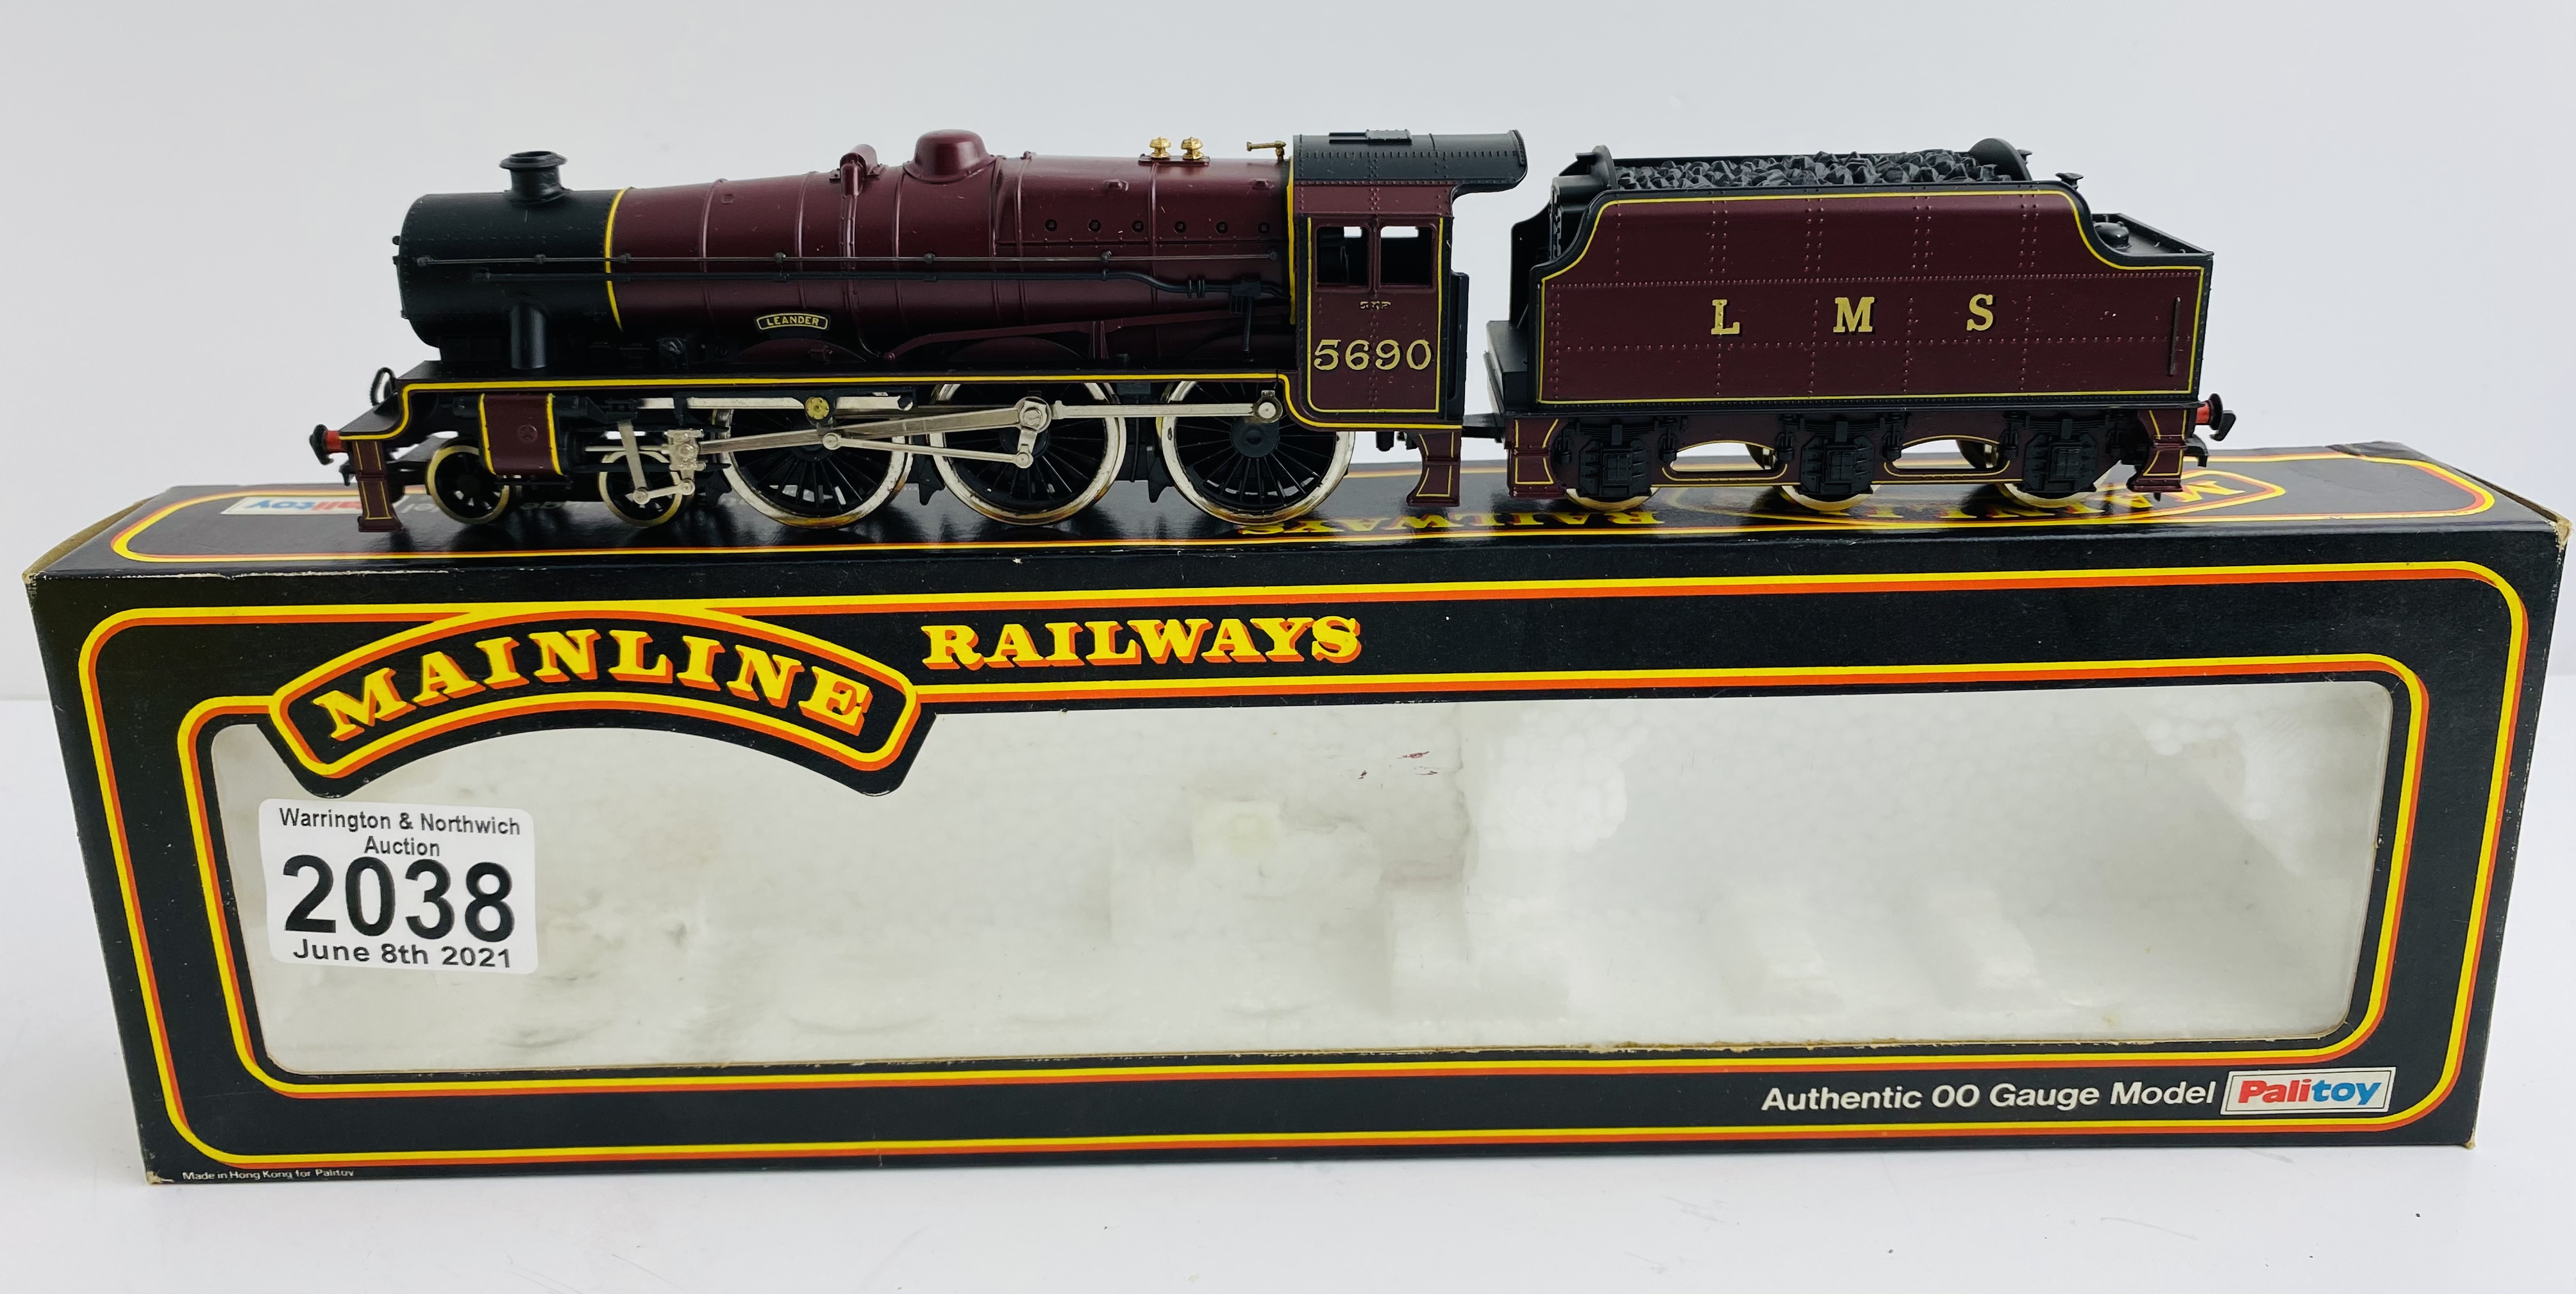 Mainline OO Gauge 'Leander' Locomotive Boxed - P&P Group 1 (£14+VAT for the first lot and £1+VAT for